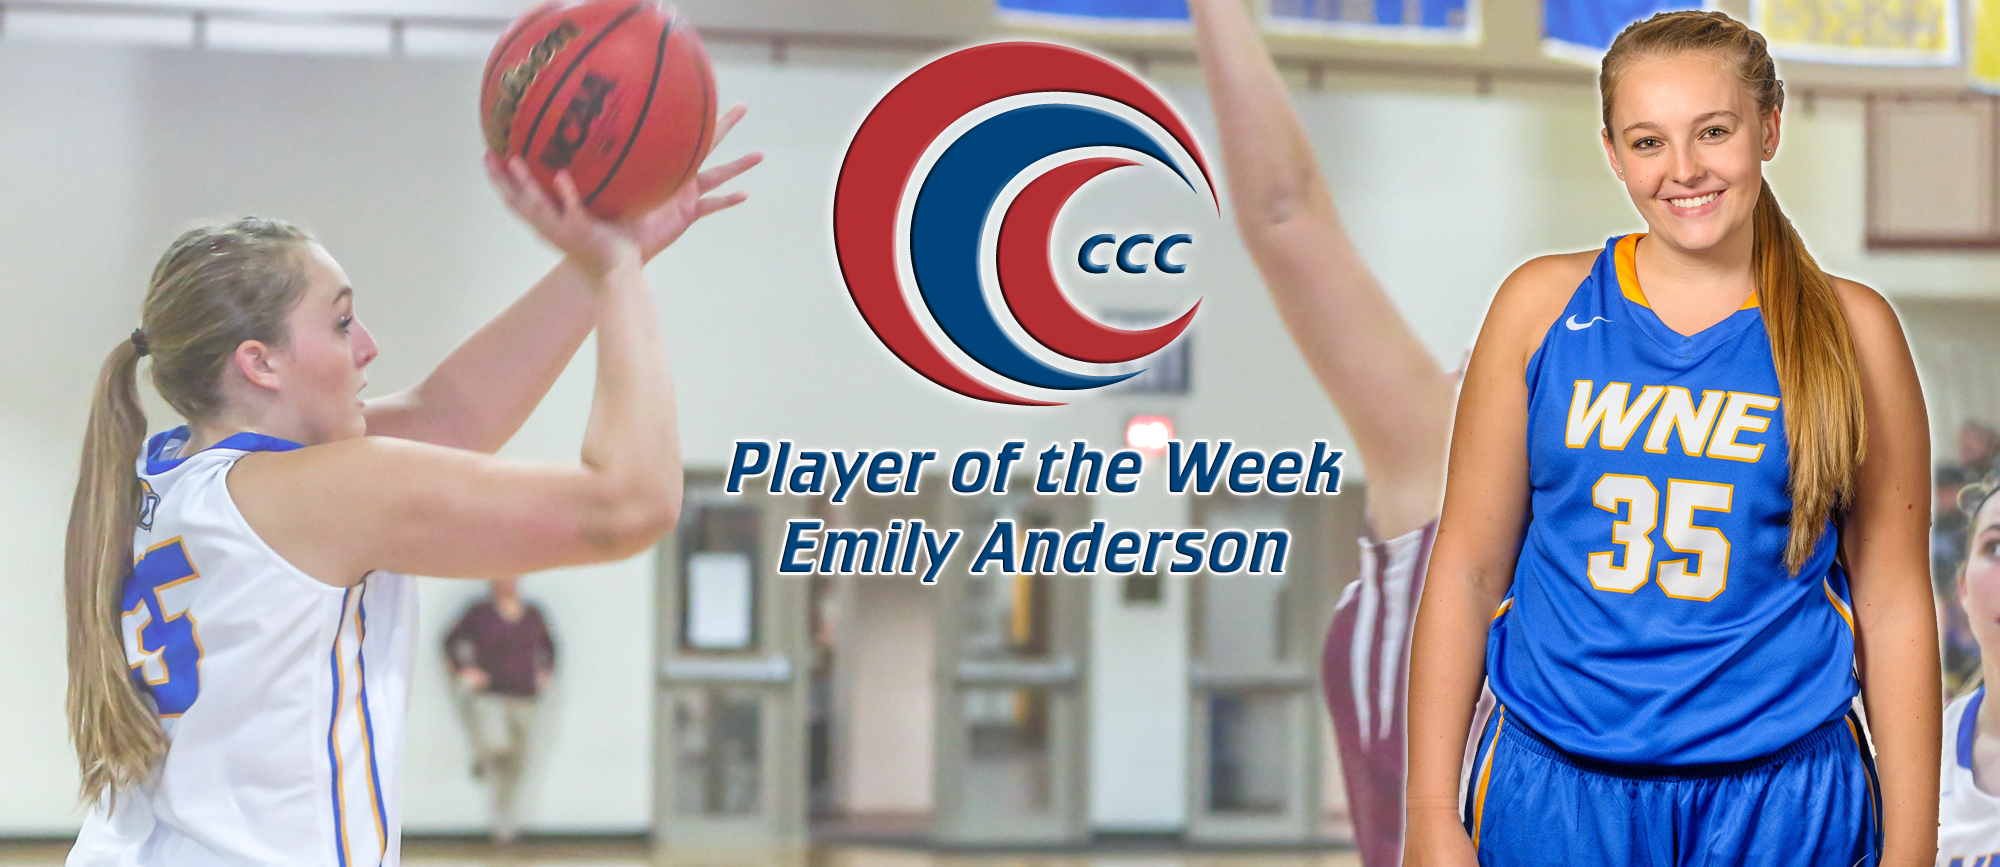 Anderson Earns Second CCC Player of the Week Award